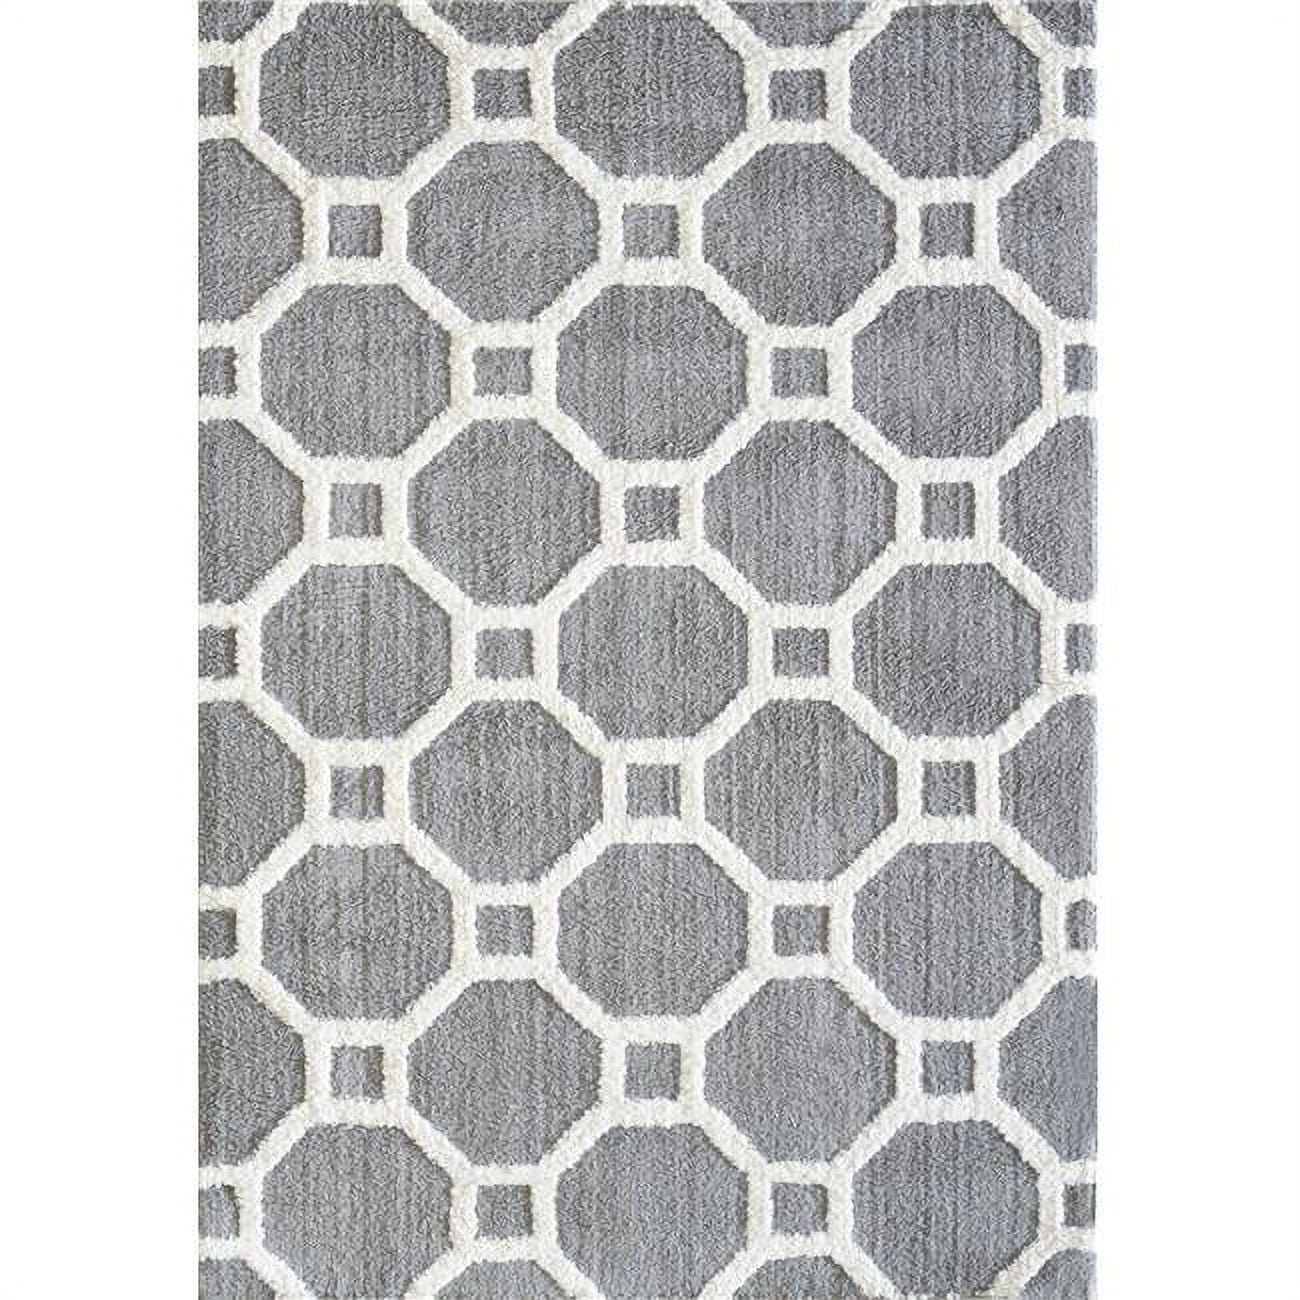 Si465903901 3 Ft. 11 In. X 5 Ft. 7 In. Silky Shag 5903 Rectangle Contemporary Rug - 901 Silver & White